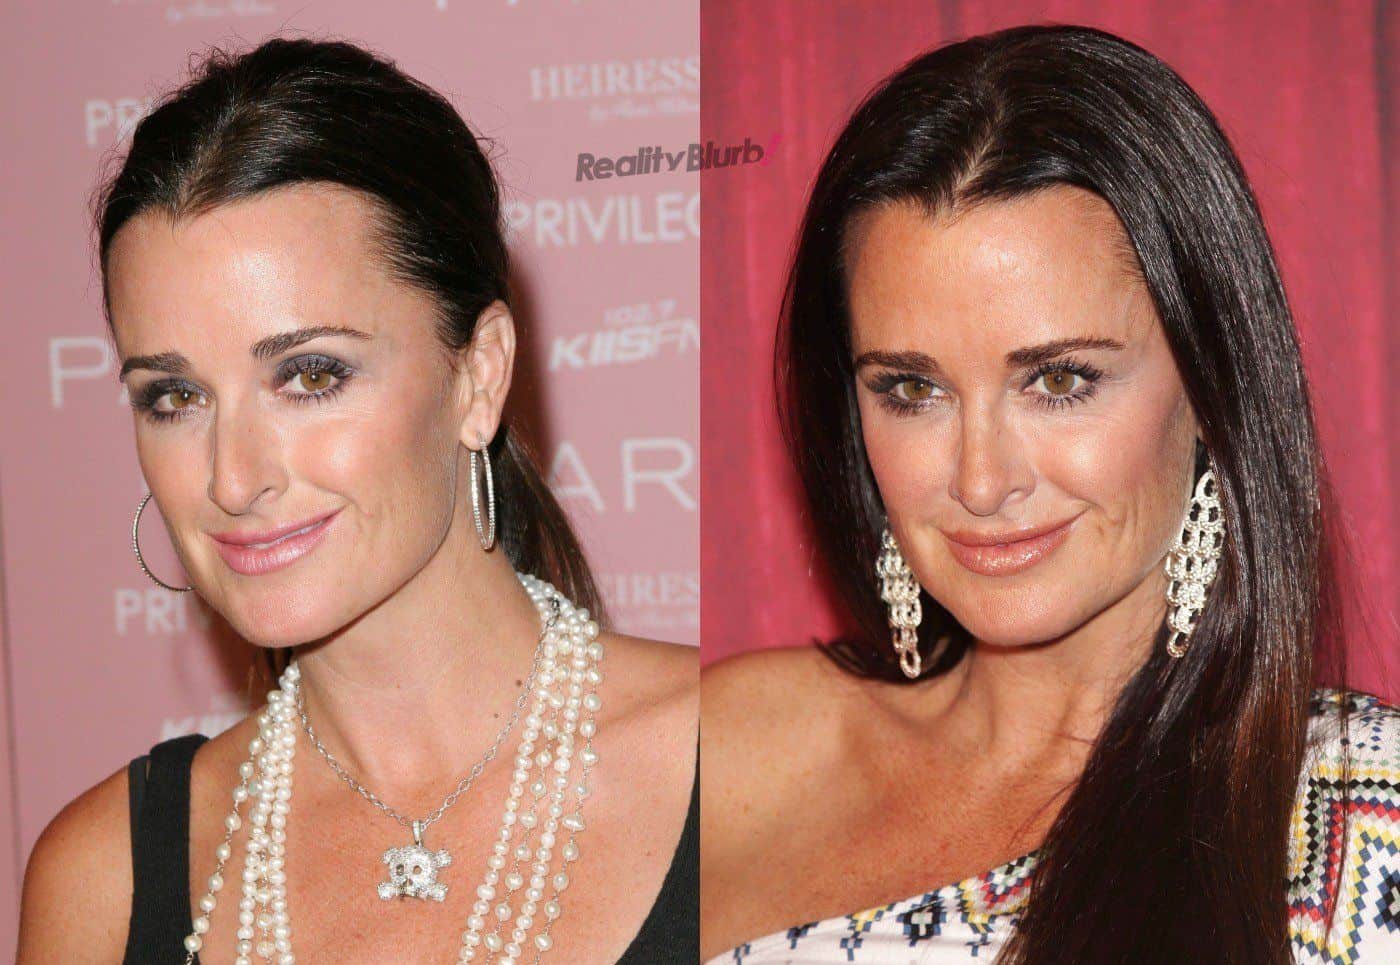 Kyle Richards Before and After (Credits: US Weekly)